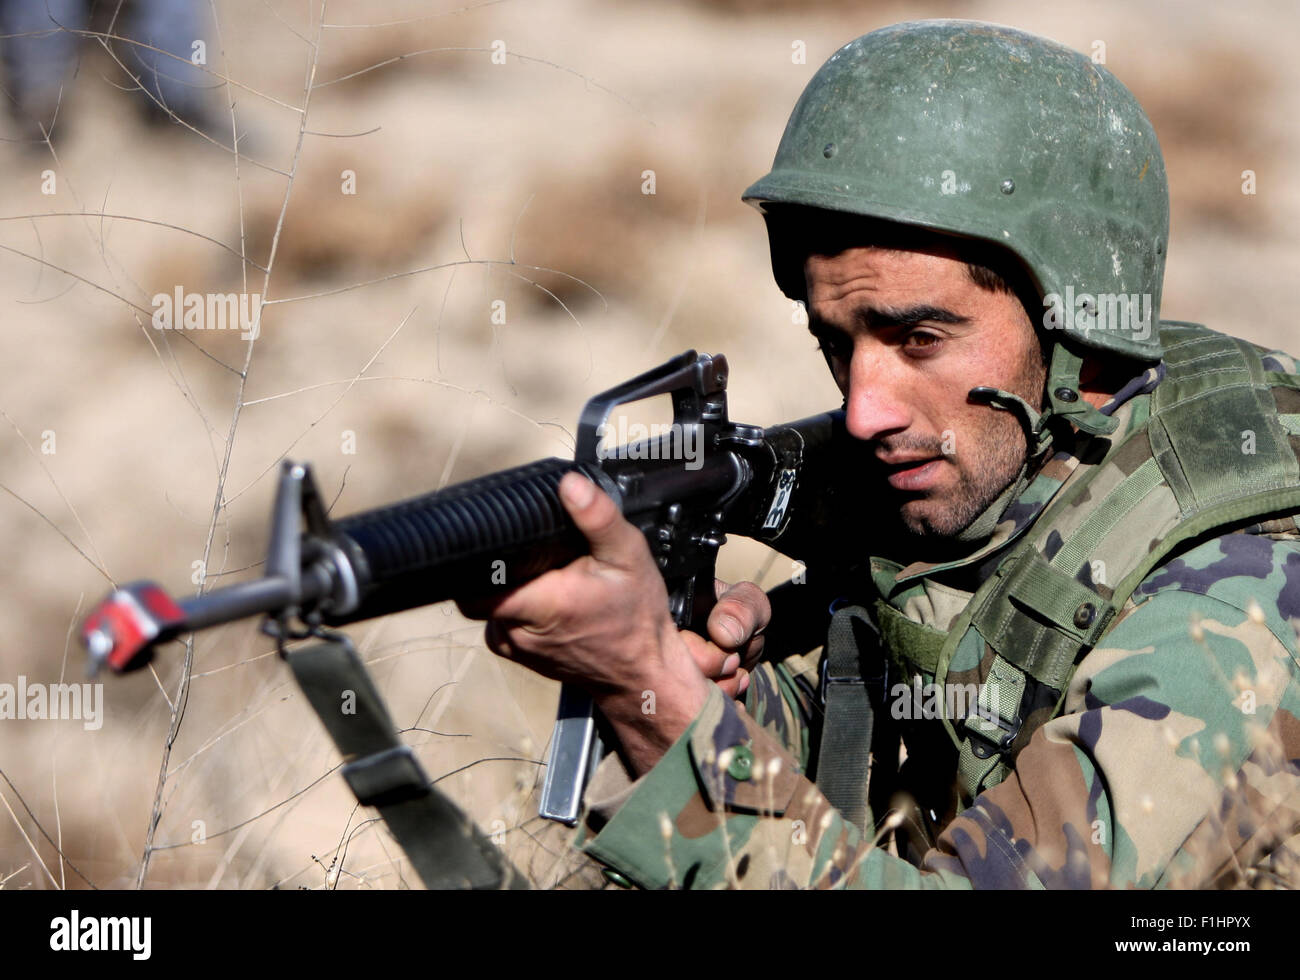 Kabul, Afghanistan. 2nd Sep, 2015. An Afghan national army soldier takes part in a military training at a training center on the outskirts of Kabul, Afghanistan, on Sept. 2, 2015. © Ahmad Massoud/Xinhua/Alamy Live News Stock Photo